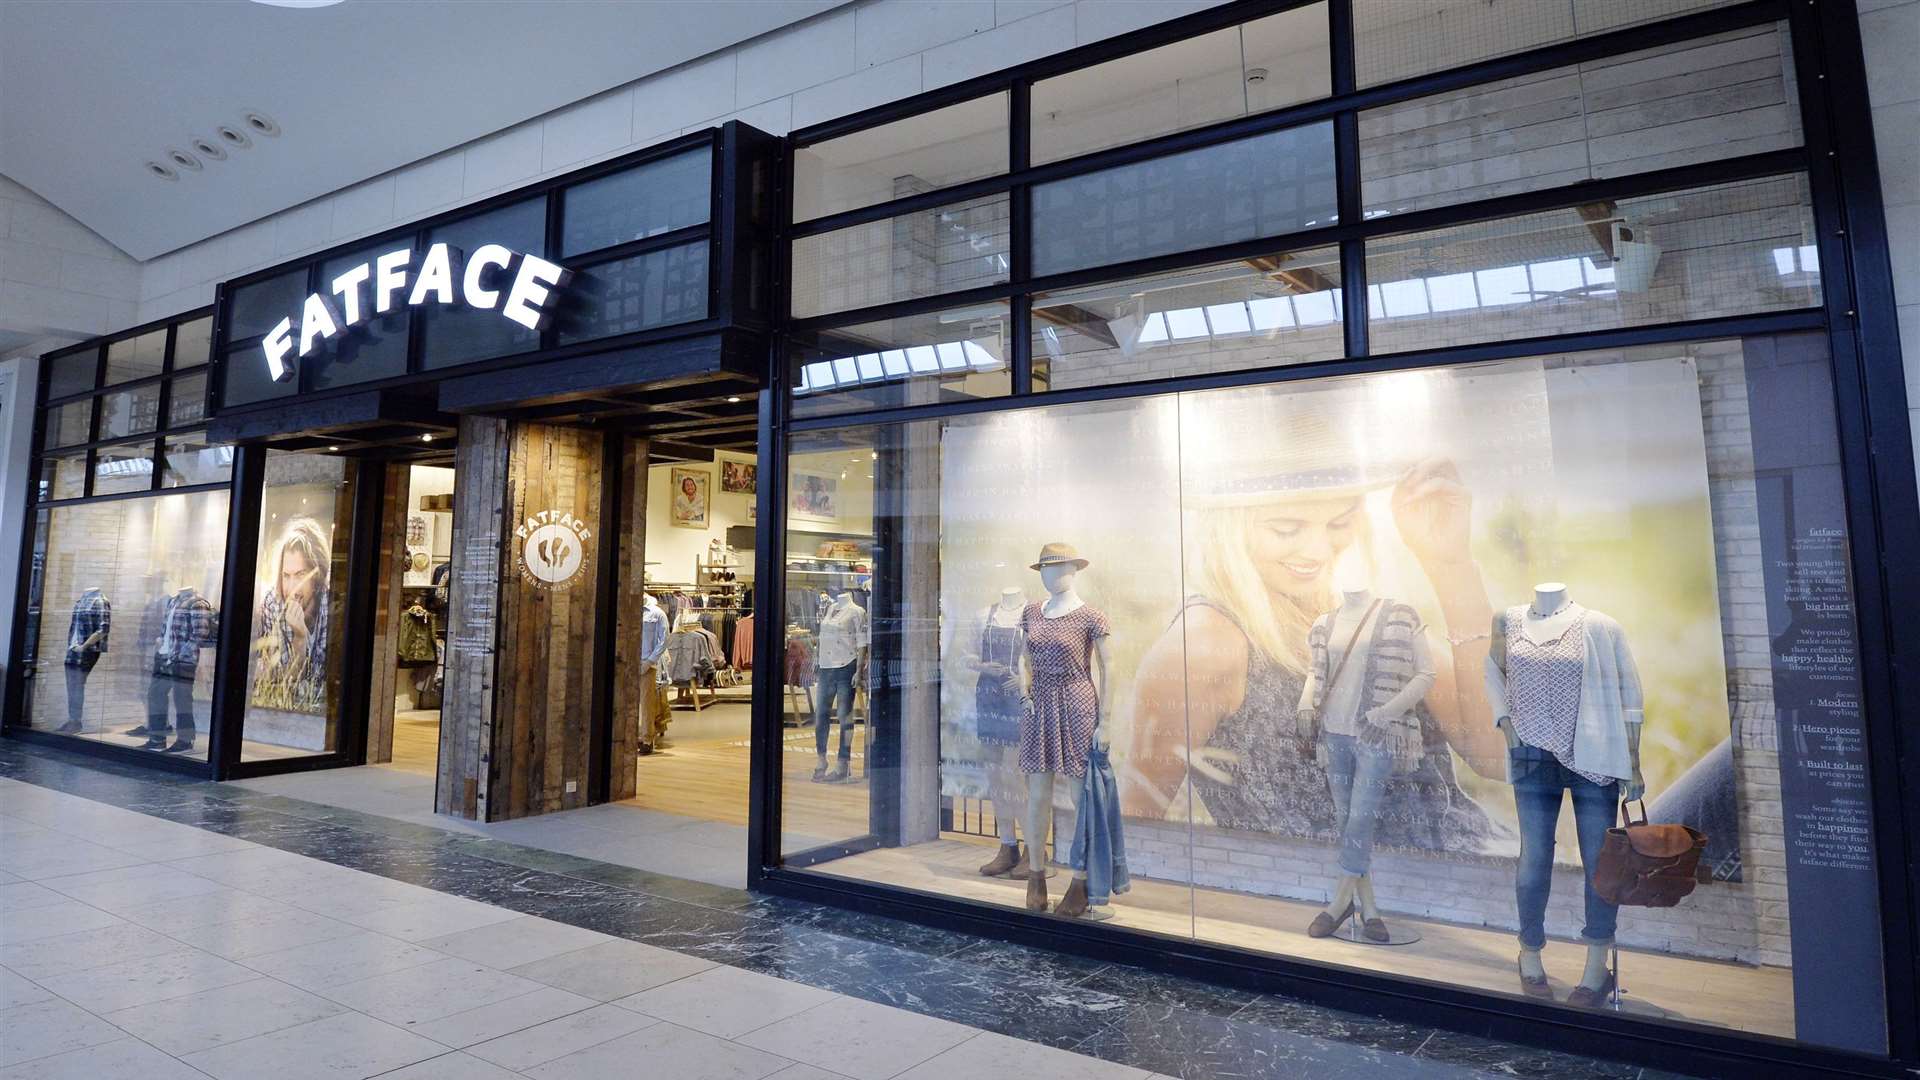 FatFace has opened a new store at Bluewater